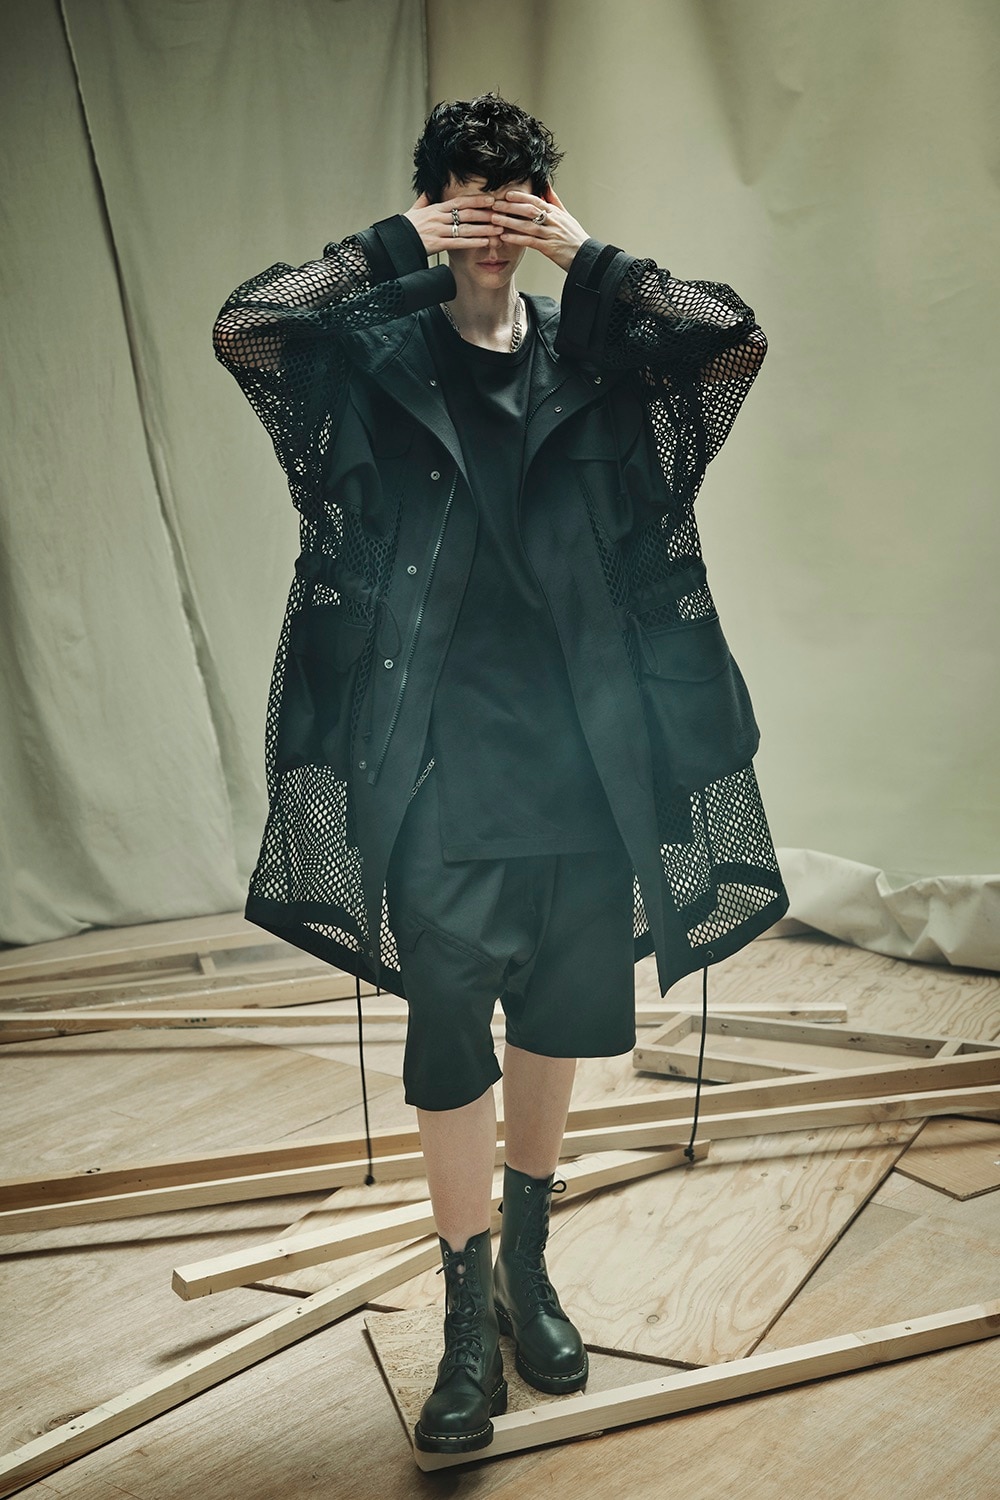 S'YTE POP UP STORE at NAGOYA PARCO | Yohji Yamamoto (ヨウジヤマモト) Official Site